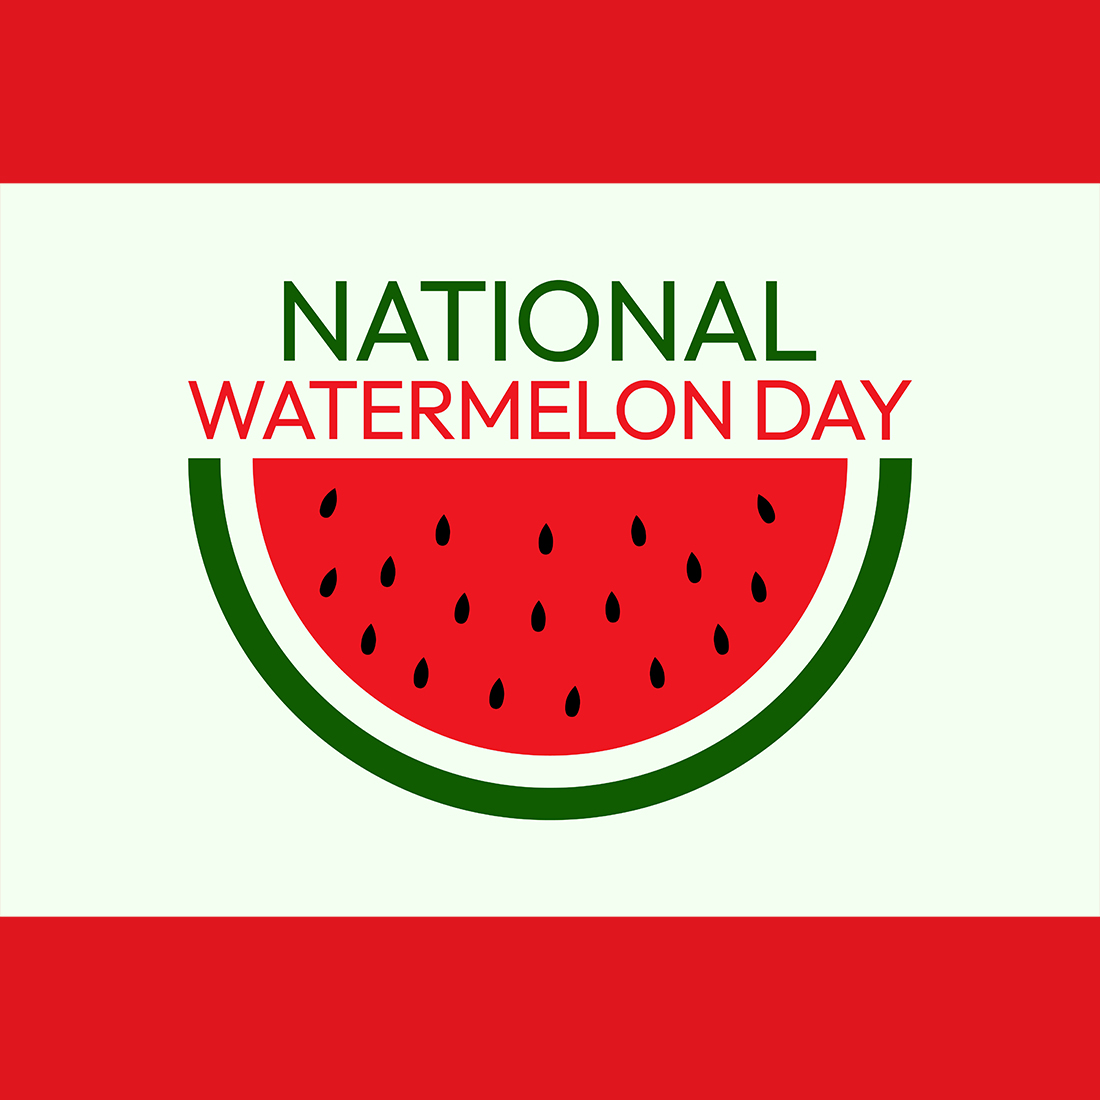 Watermelon, national watermelon day 3 august preview image.